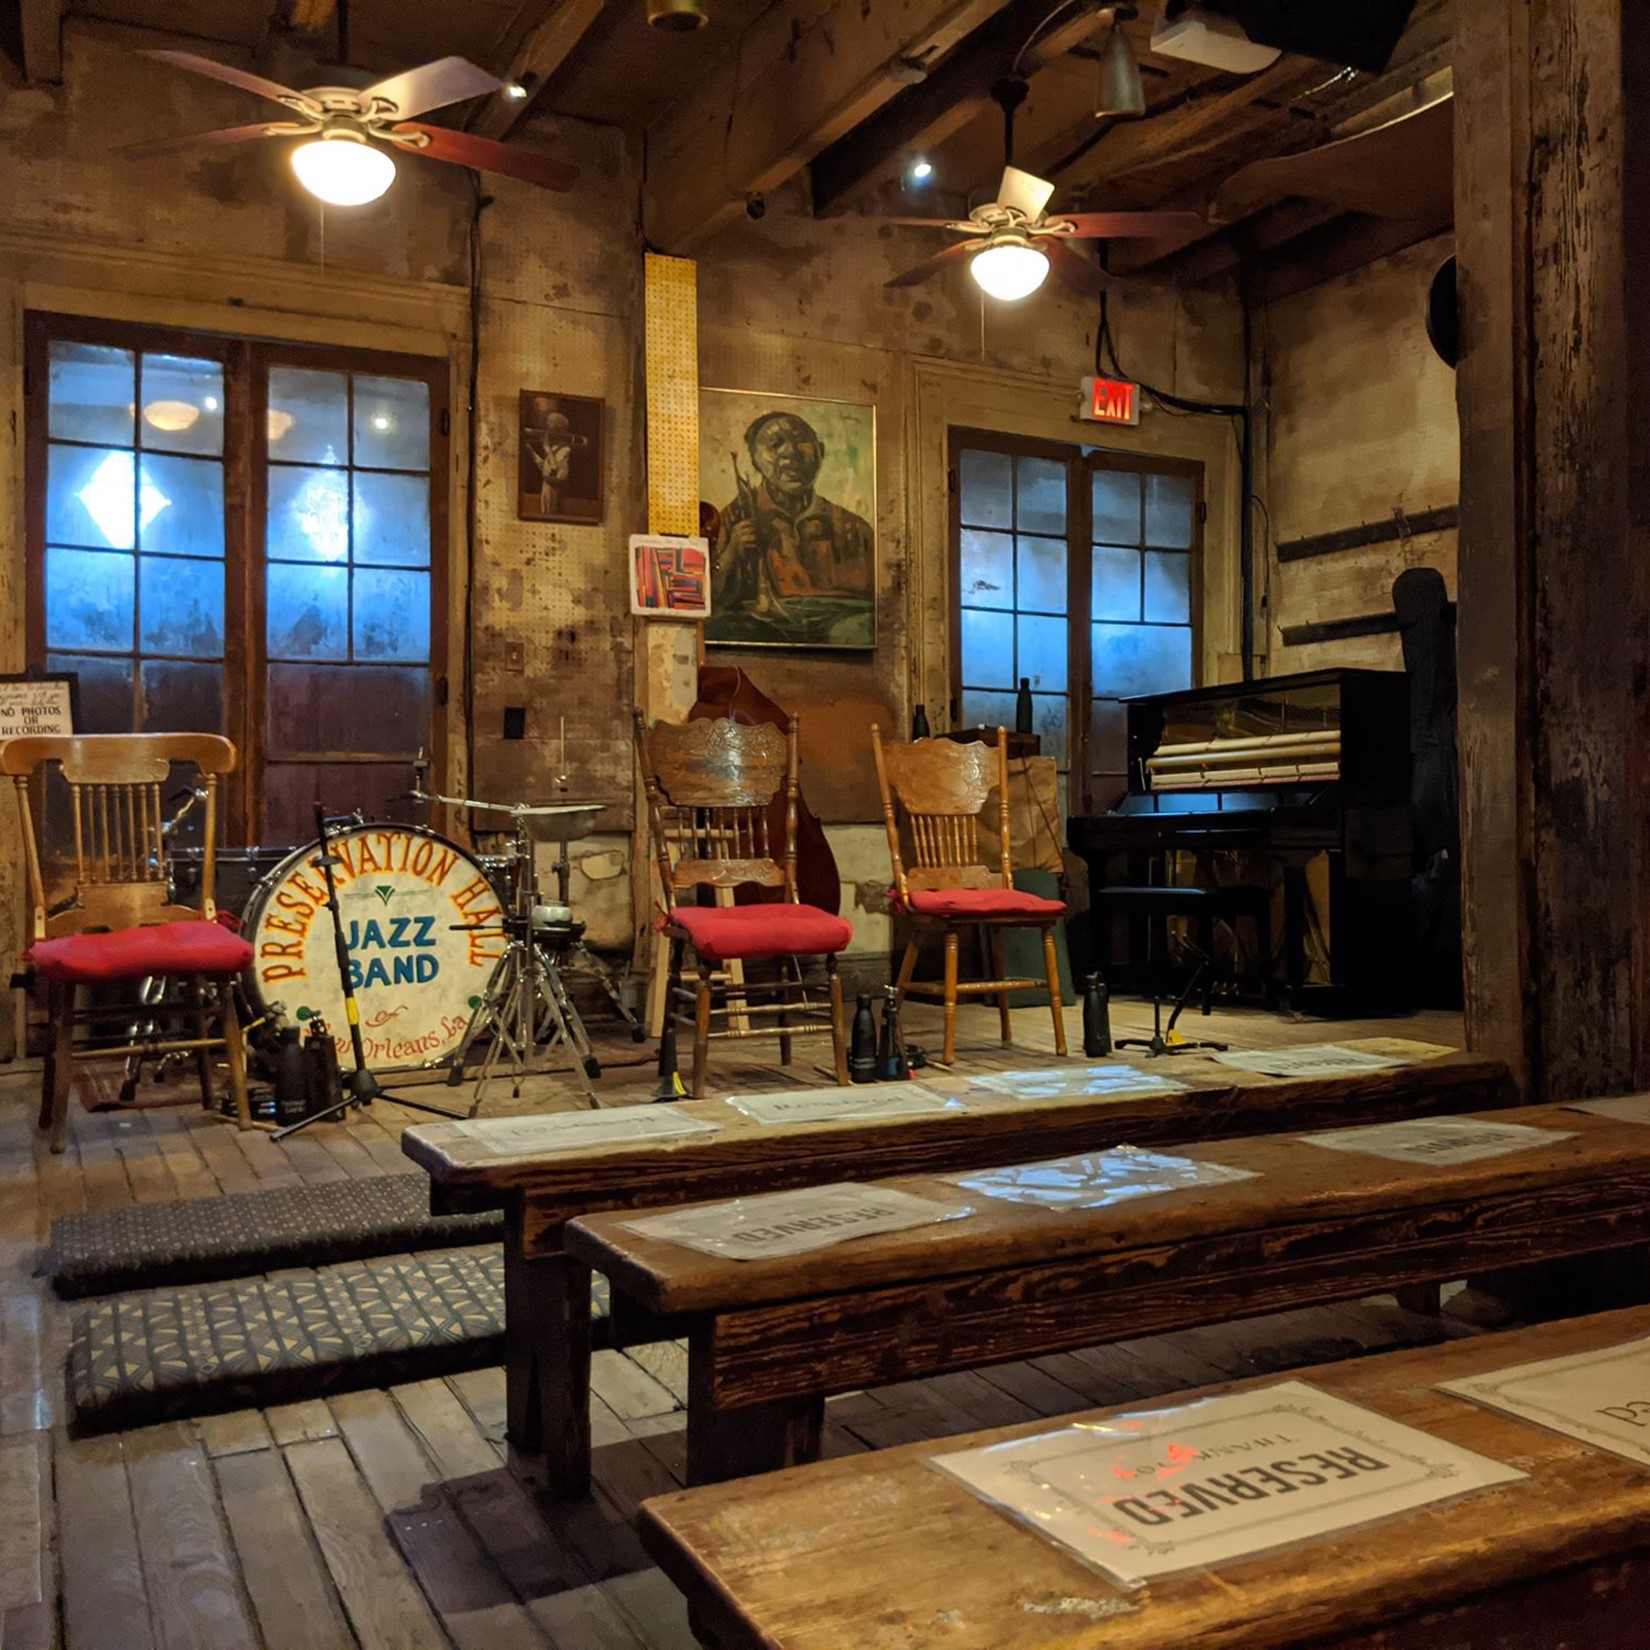 Concert Hall "Preservation Hall" Chaffins Barn Theater